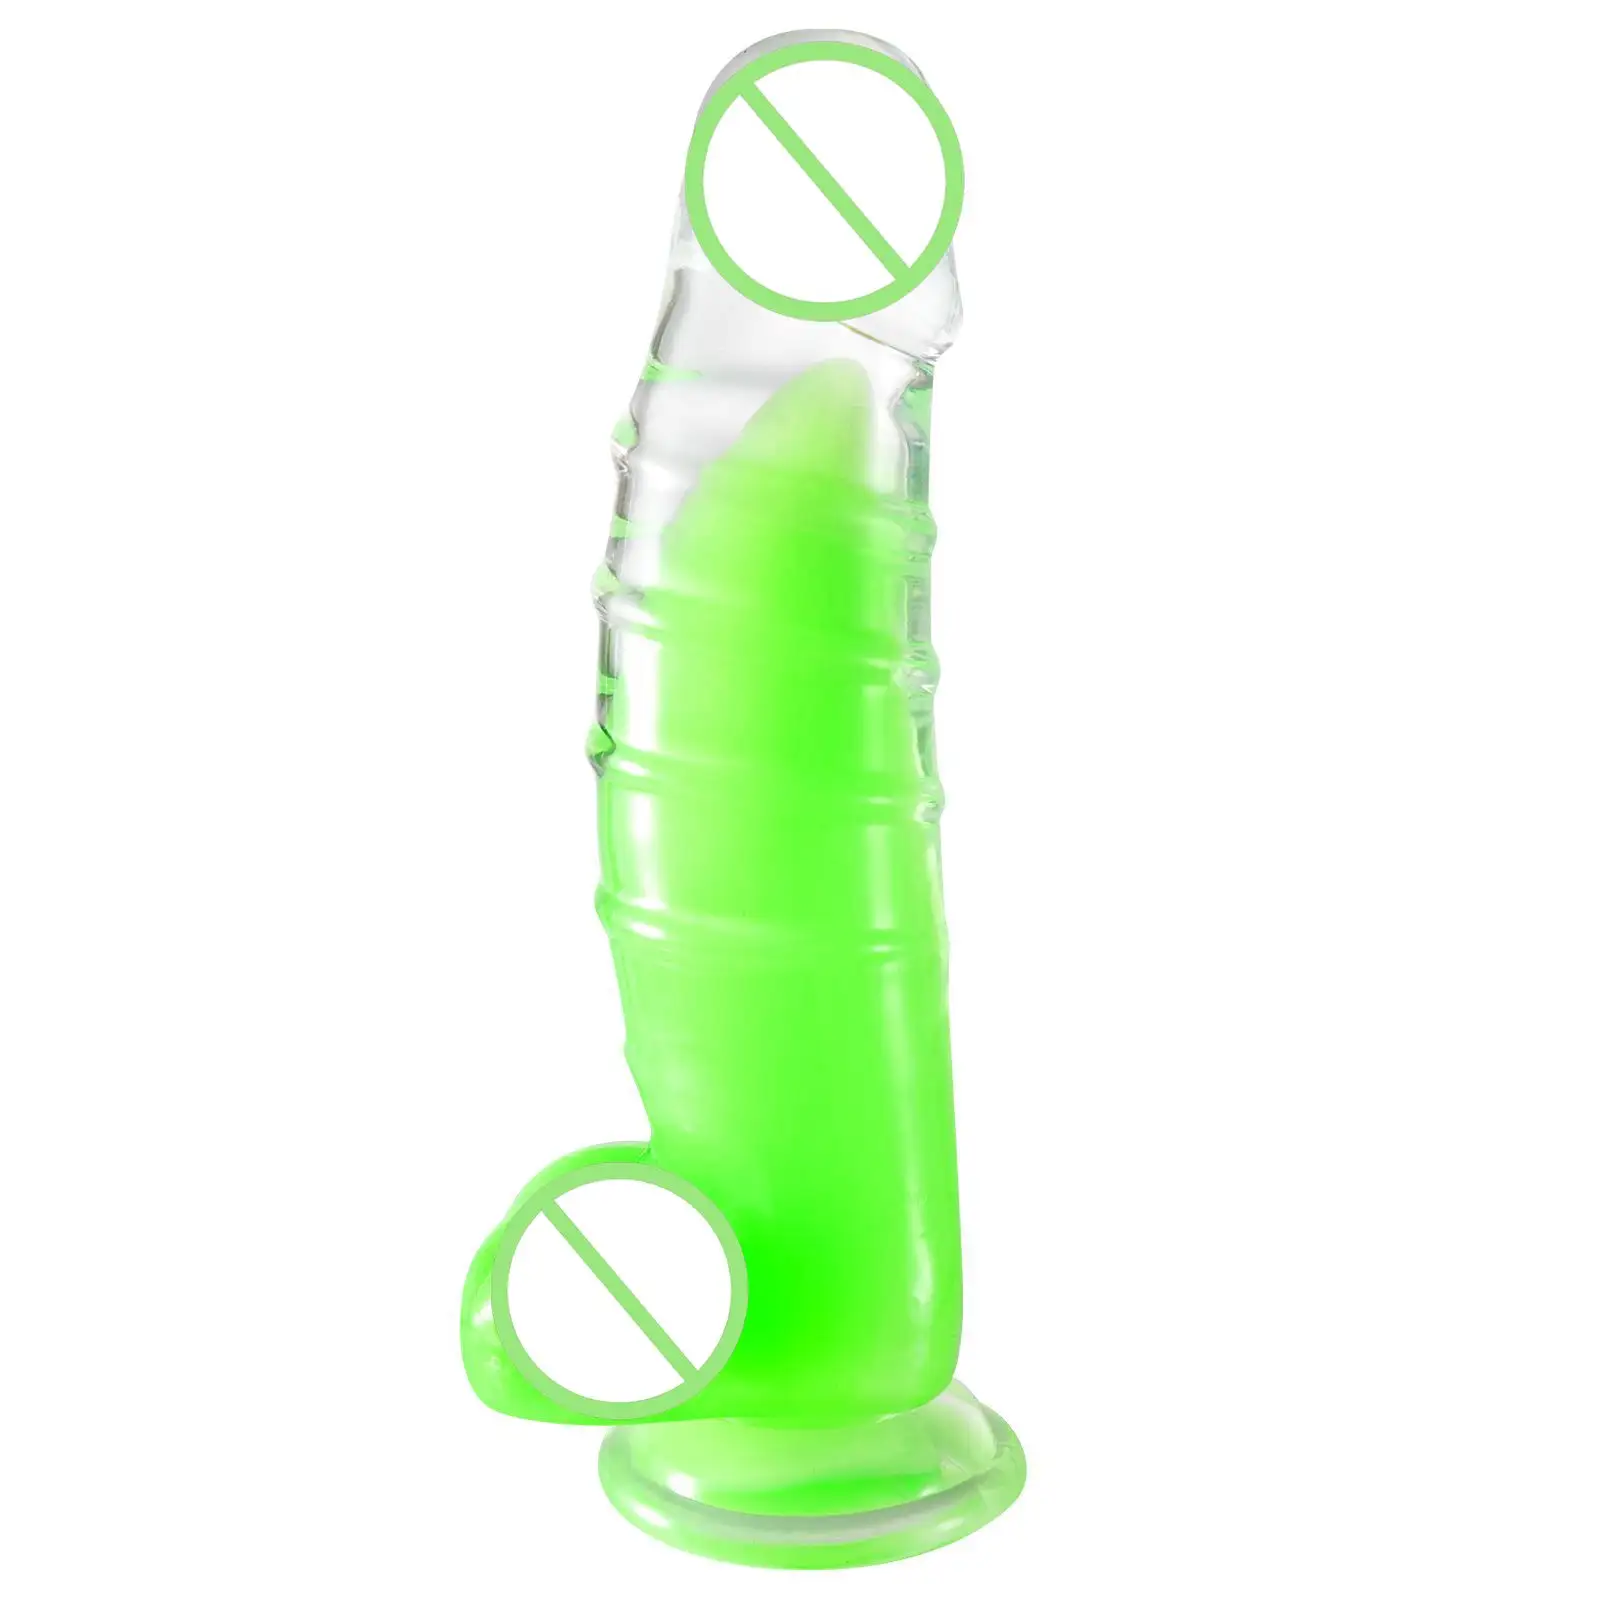 5 Sizes XXL Super Huge Luminous Dildo Anal Plug Strong Suction Cup Vagina G-spot Stimulation Penis Glow at Night For Women Men